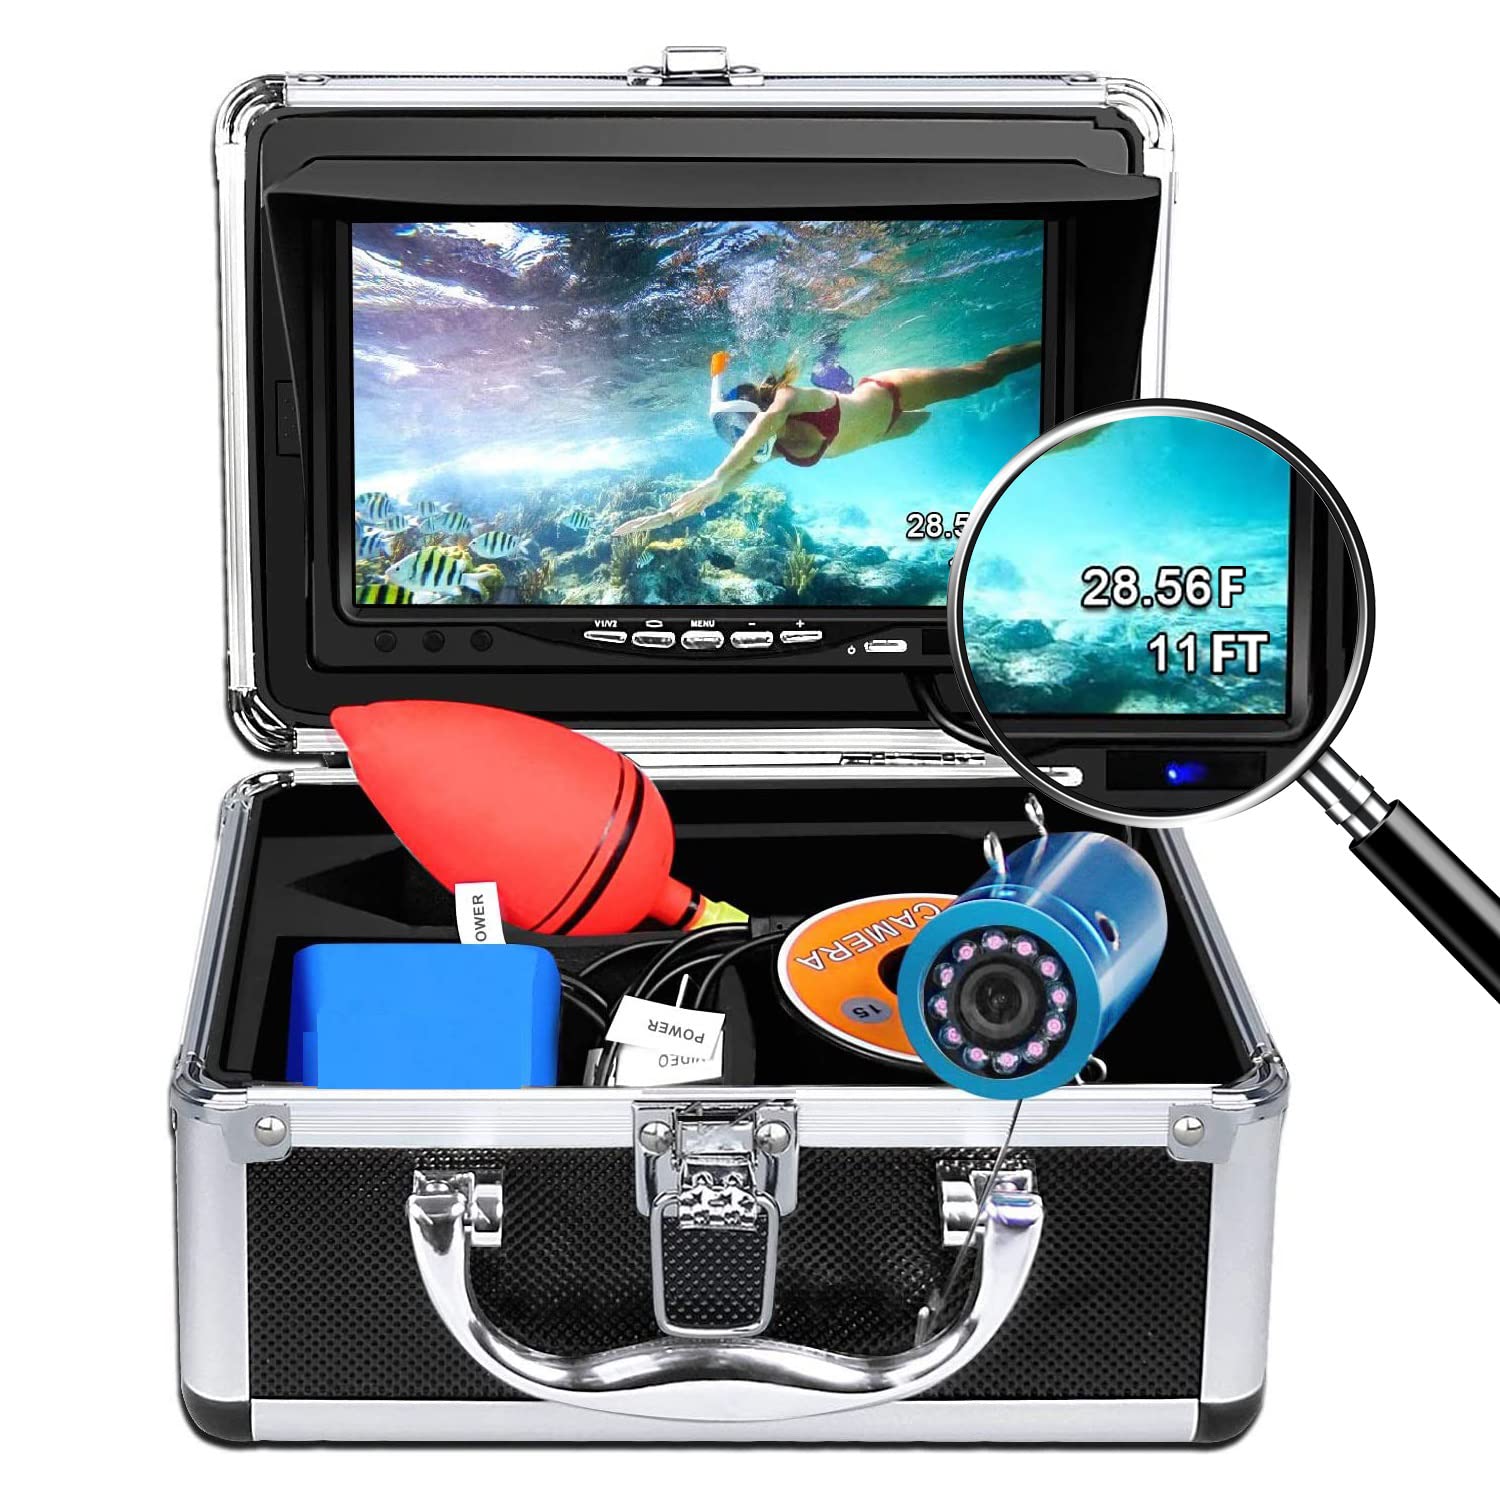 Portable Underwater Fishing Camera with Depth Temperature Display 49FT  without DVR